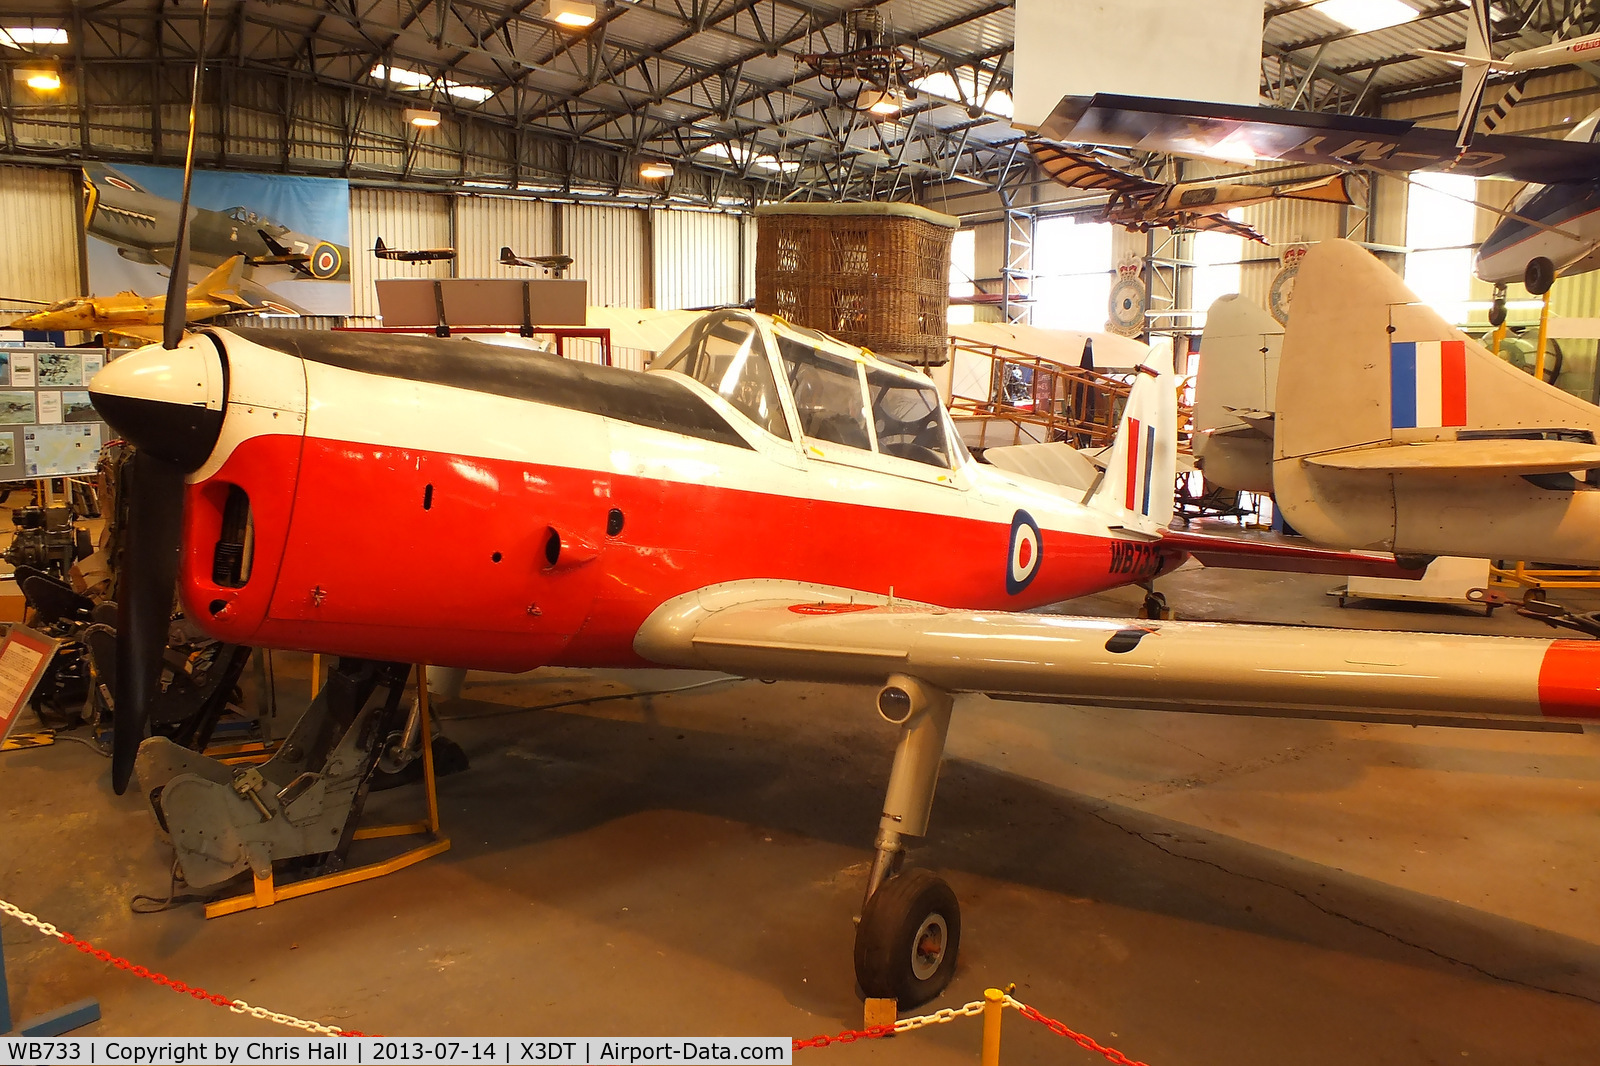 WB733, 1950 De Havilland DHC-1 Chipmunk T.10 C/N C1/0182, preserved at the South Yorkshire Aircraft Museum, AeroVenture, Doncaster